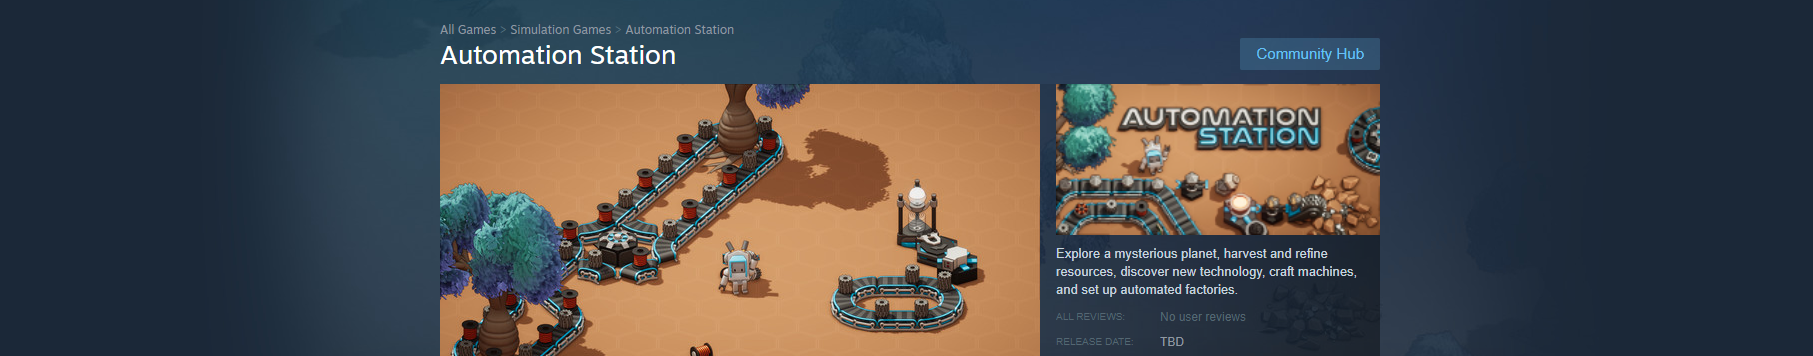 The Steam page for Automation Station is live!